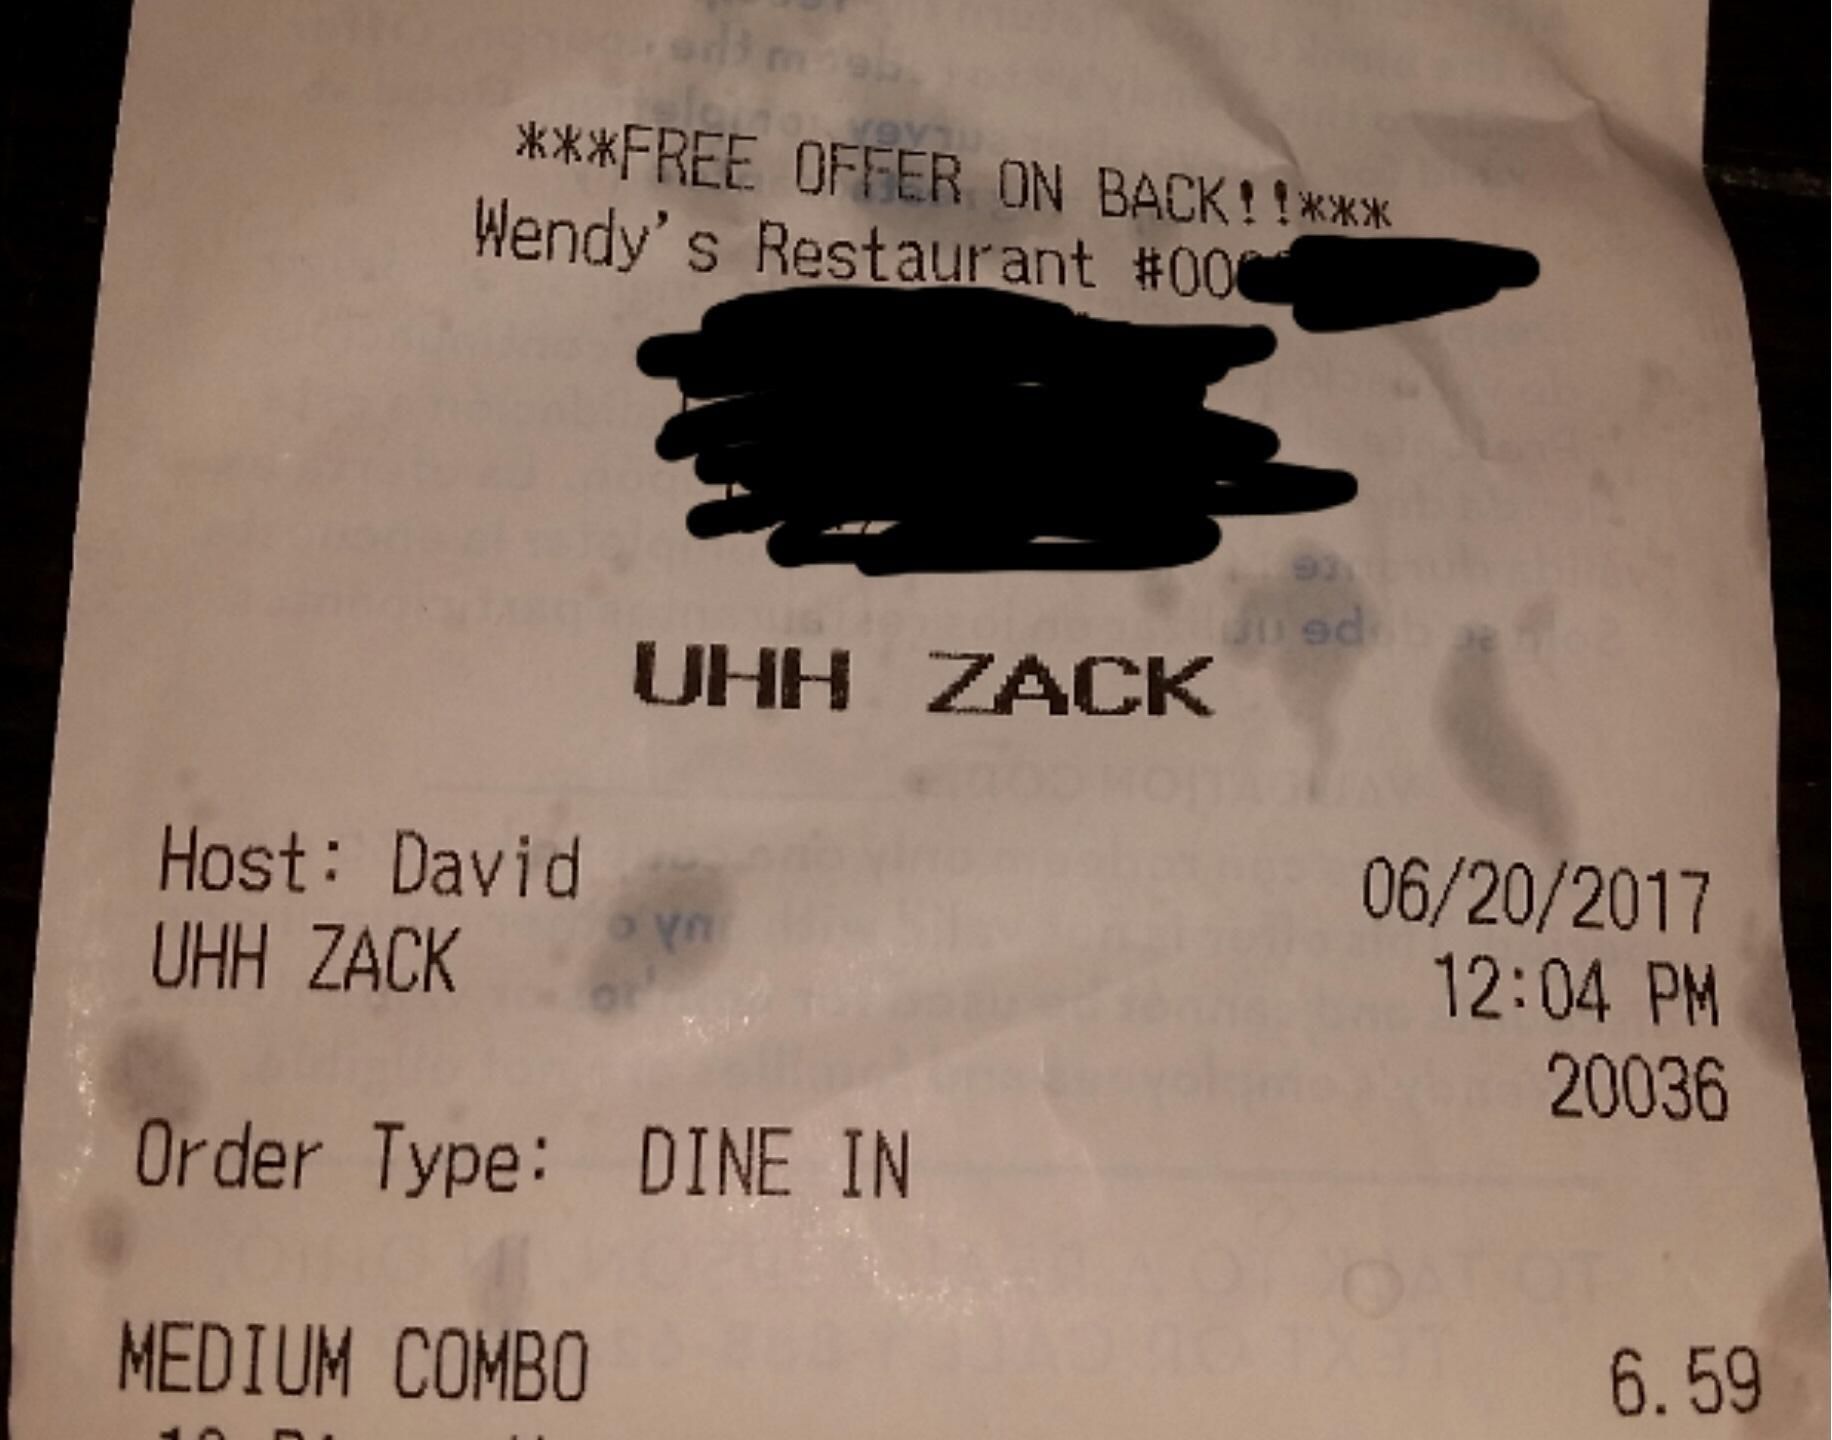 Don't hesitate when telling David your name...